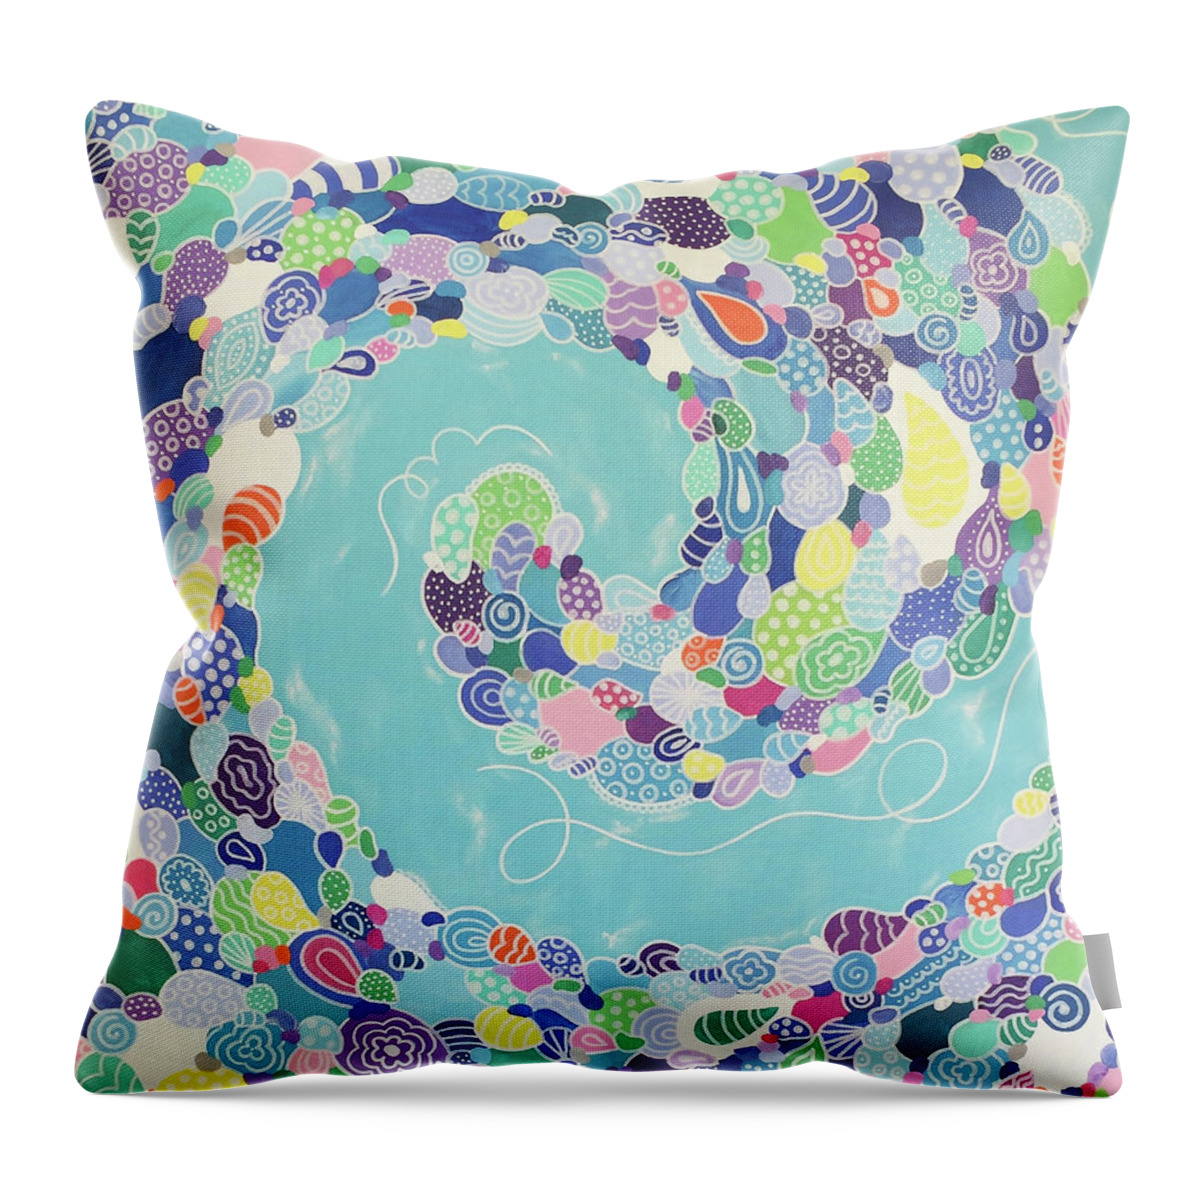 Pattern Art Throw Pillow featuring the painting Swirling Medley by Beth Ann Scott